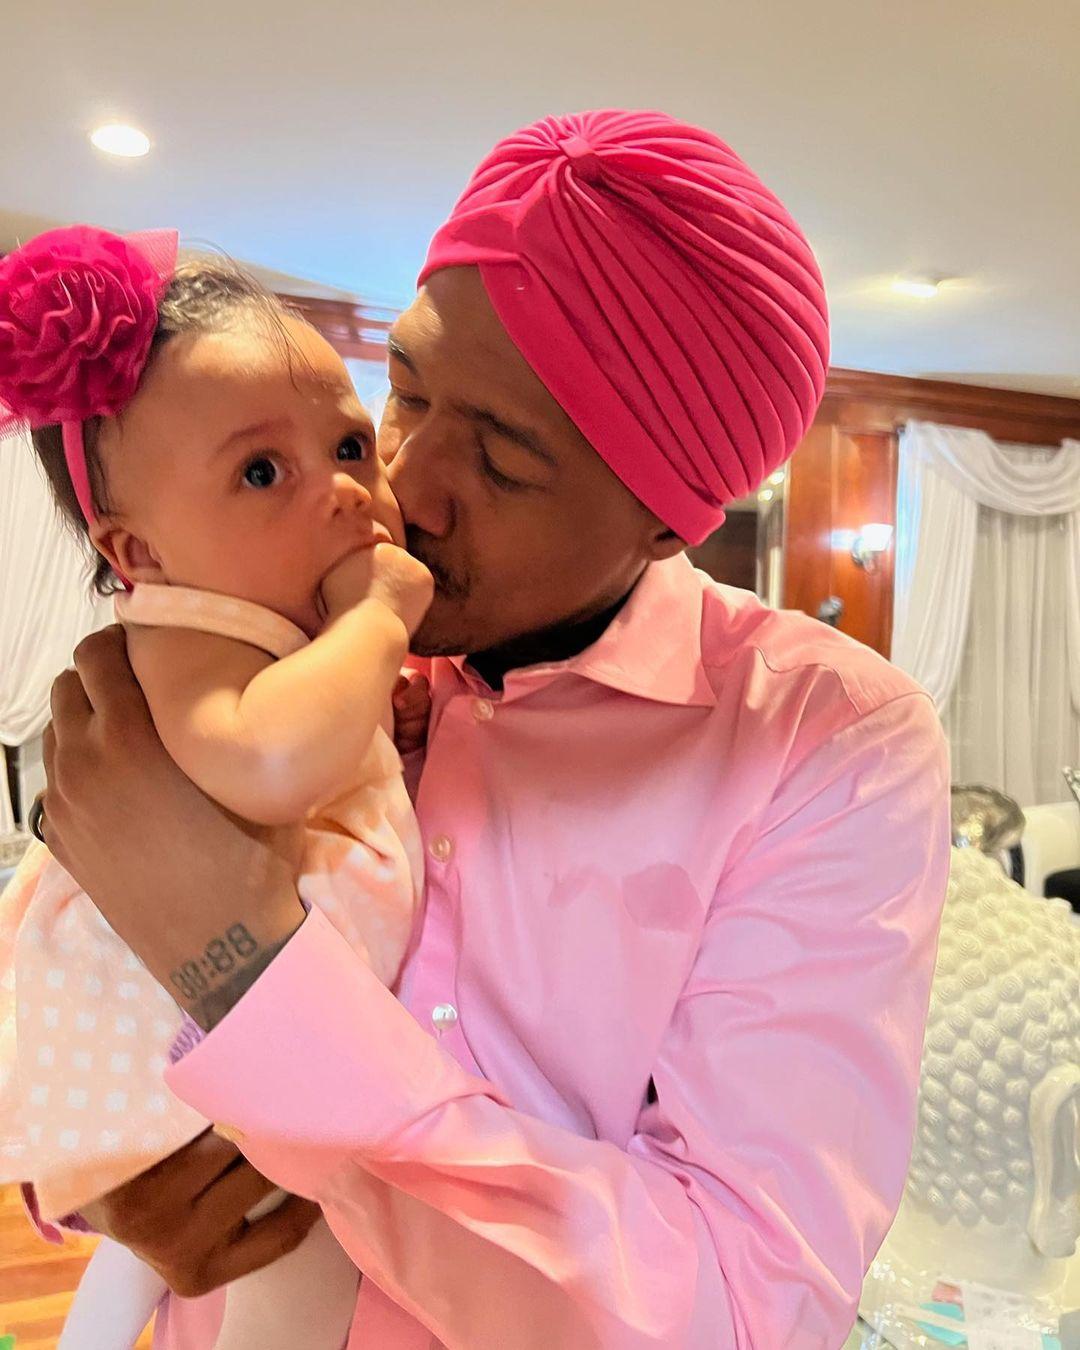 Nick Cannon bonds with daughter Halo in matching pink outfits